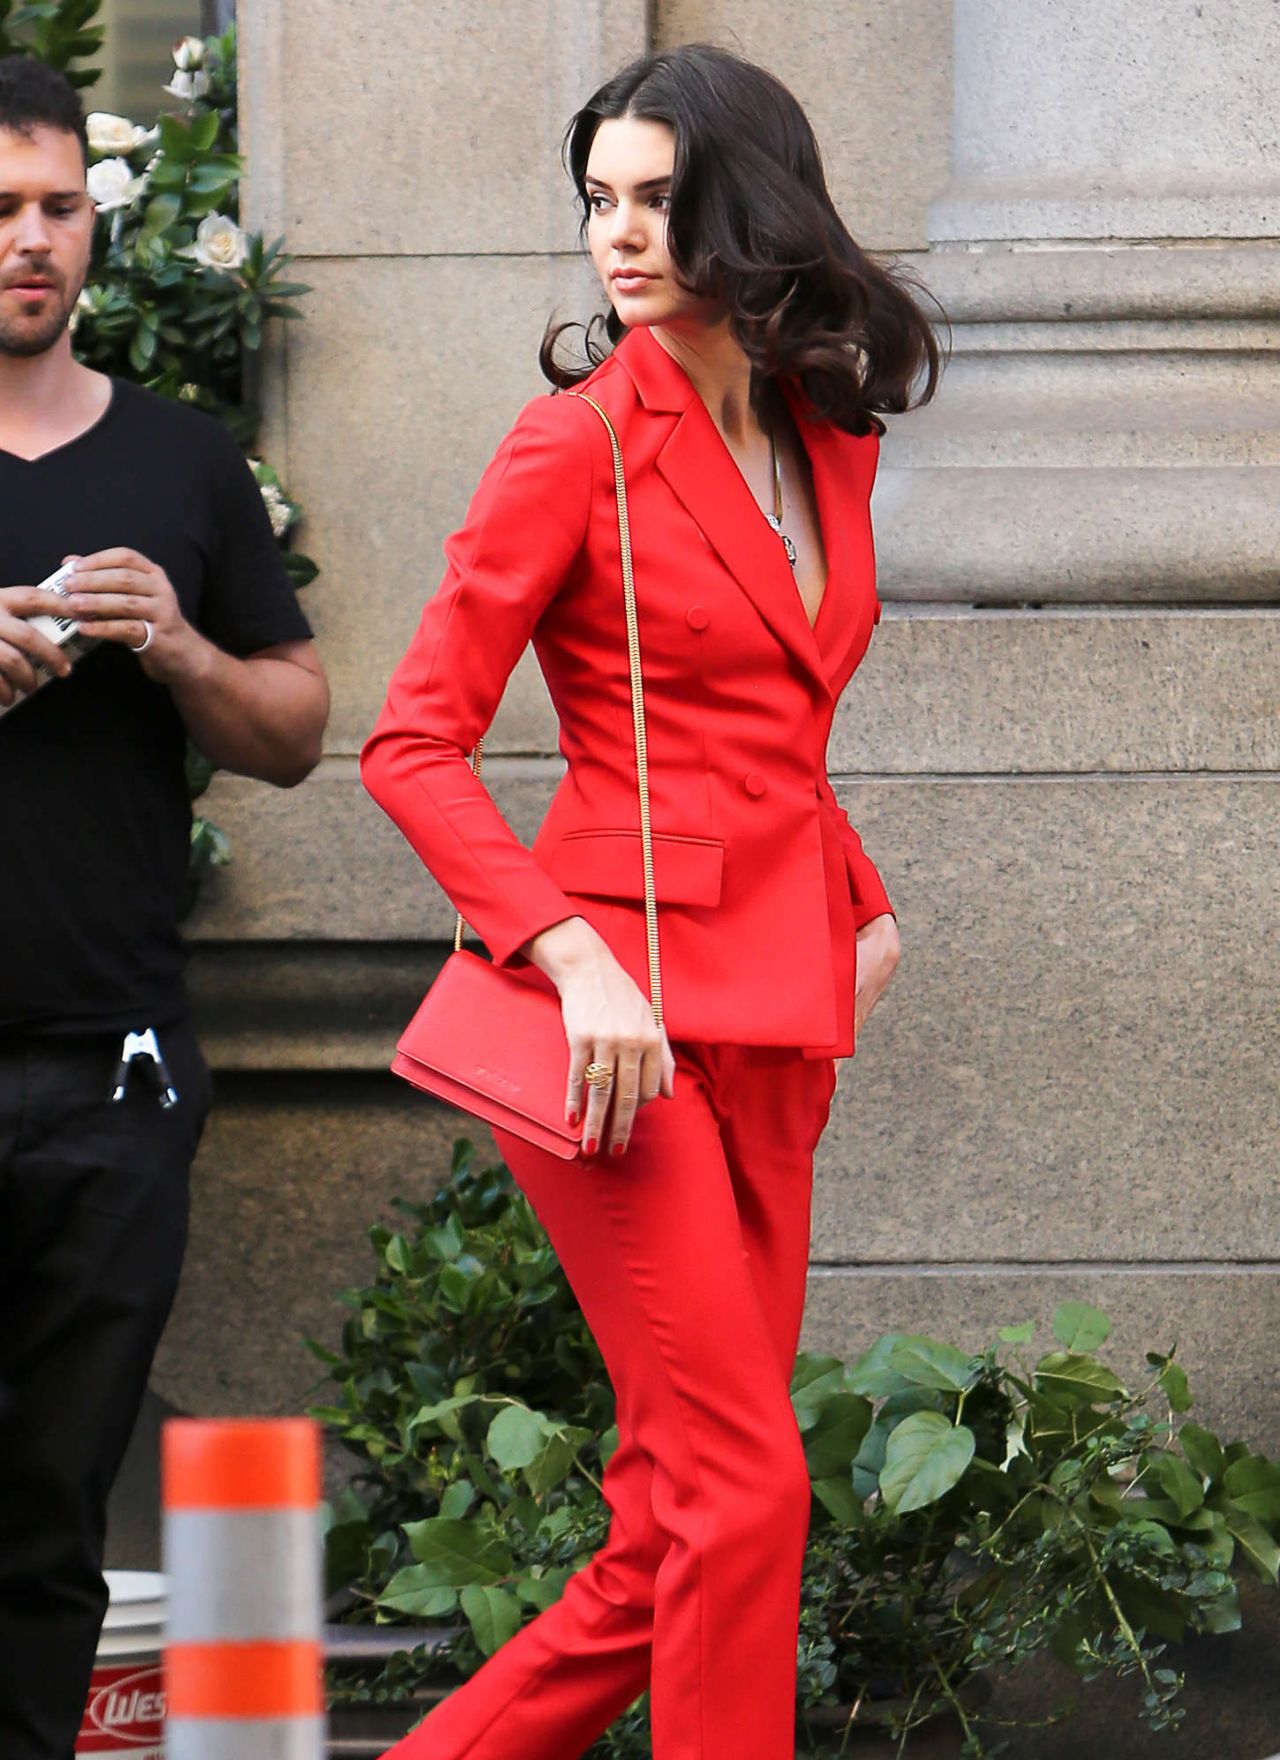 Kendall Jenner in All Red - Photoshoot in Los Angeles, November 2014